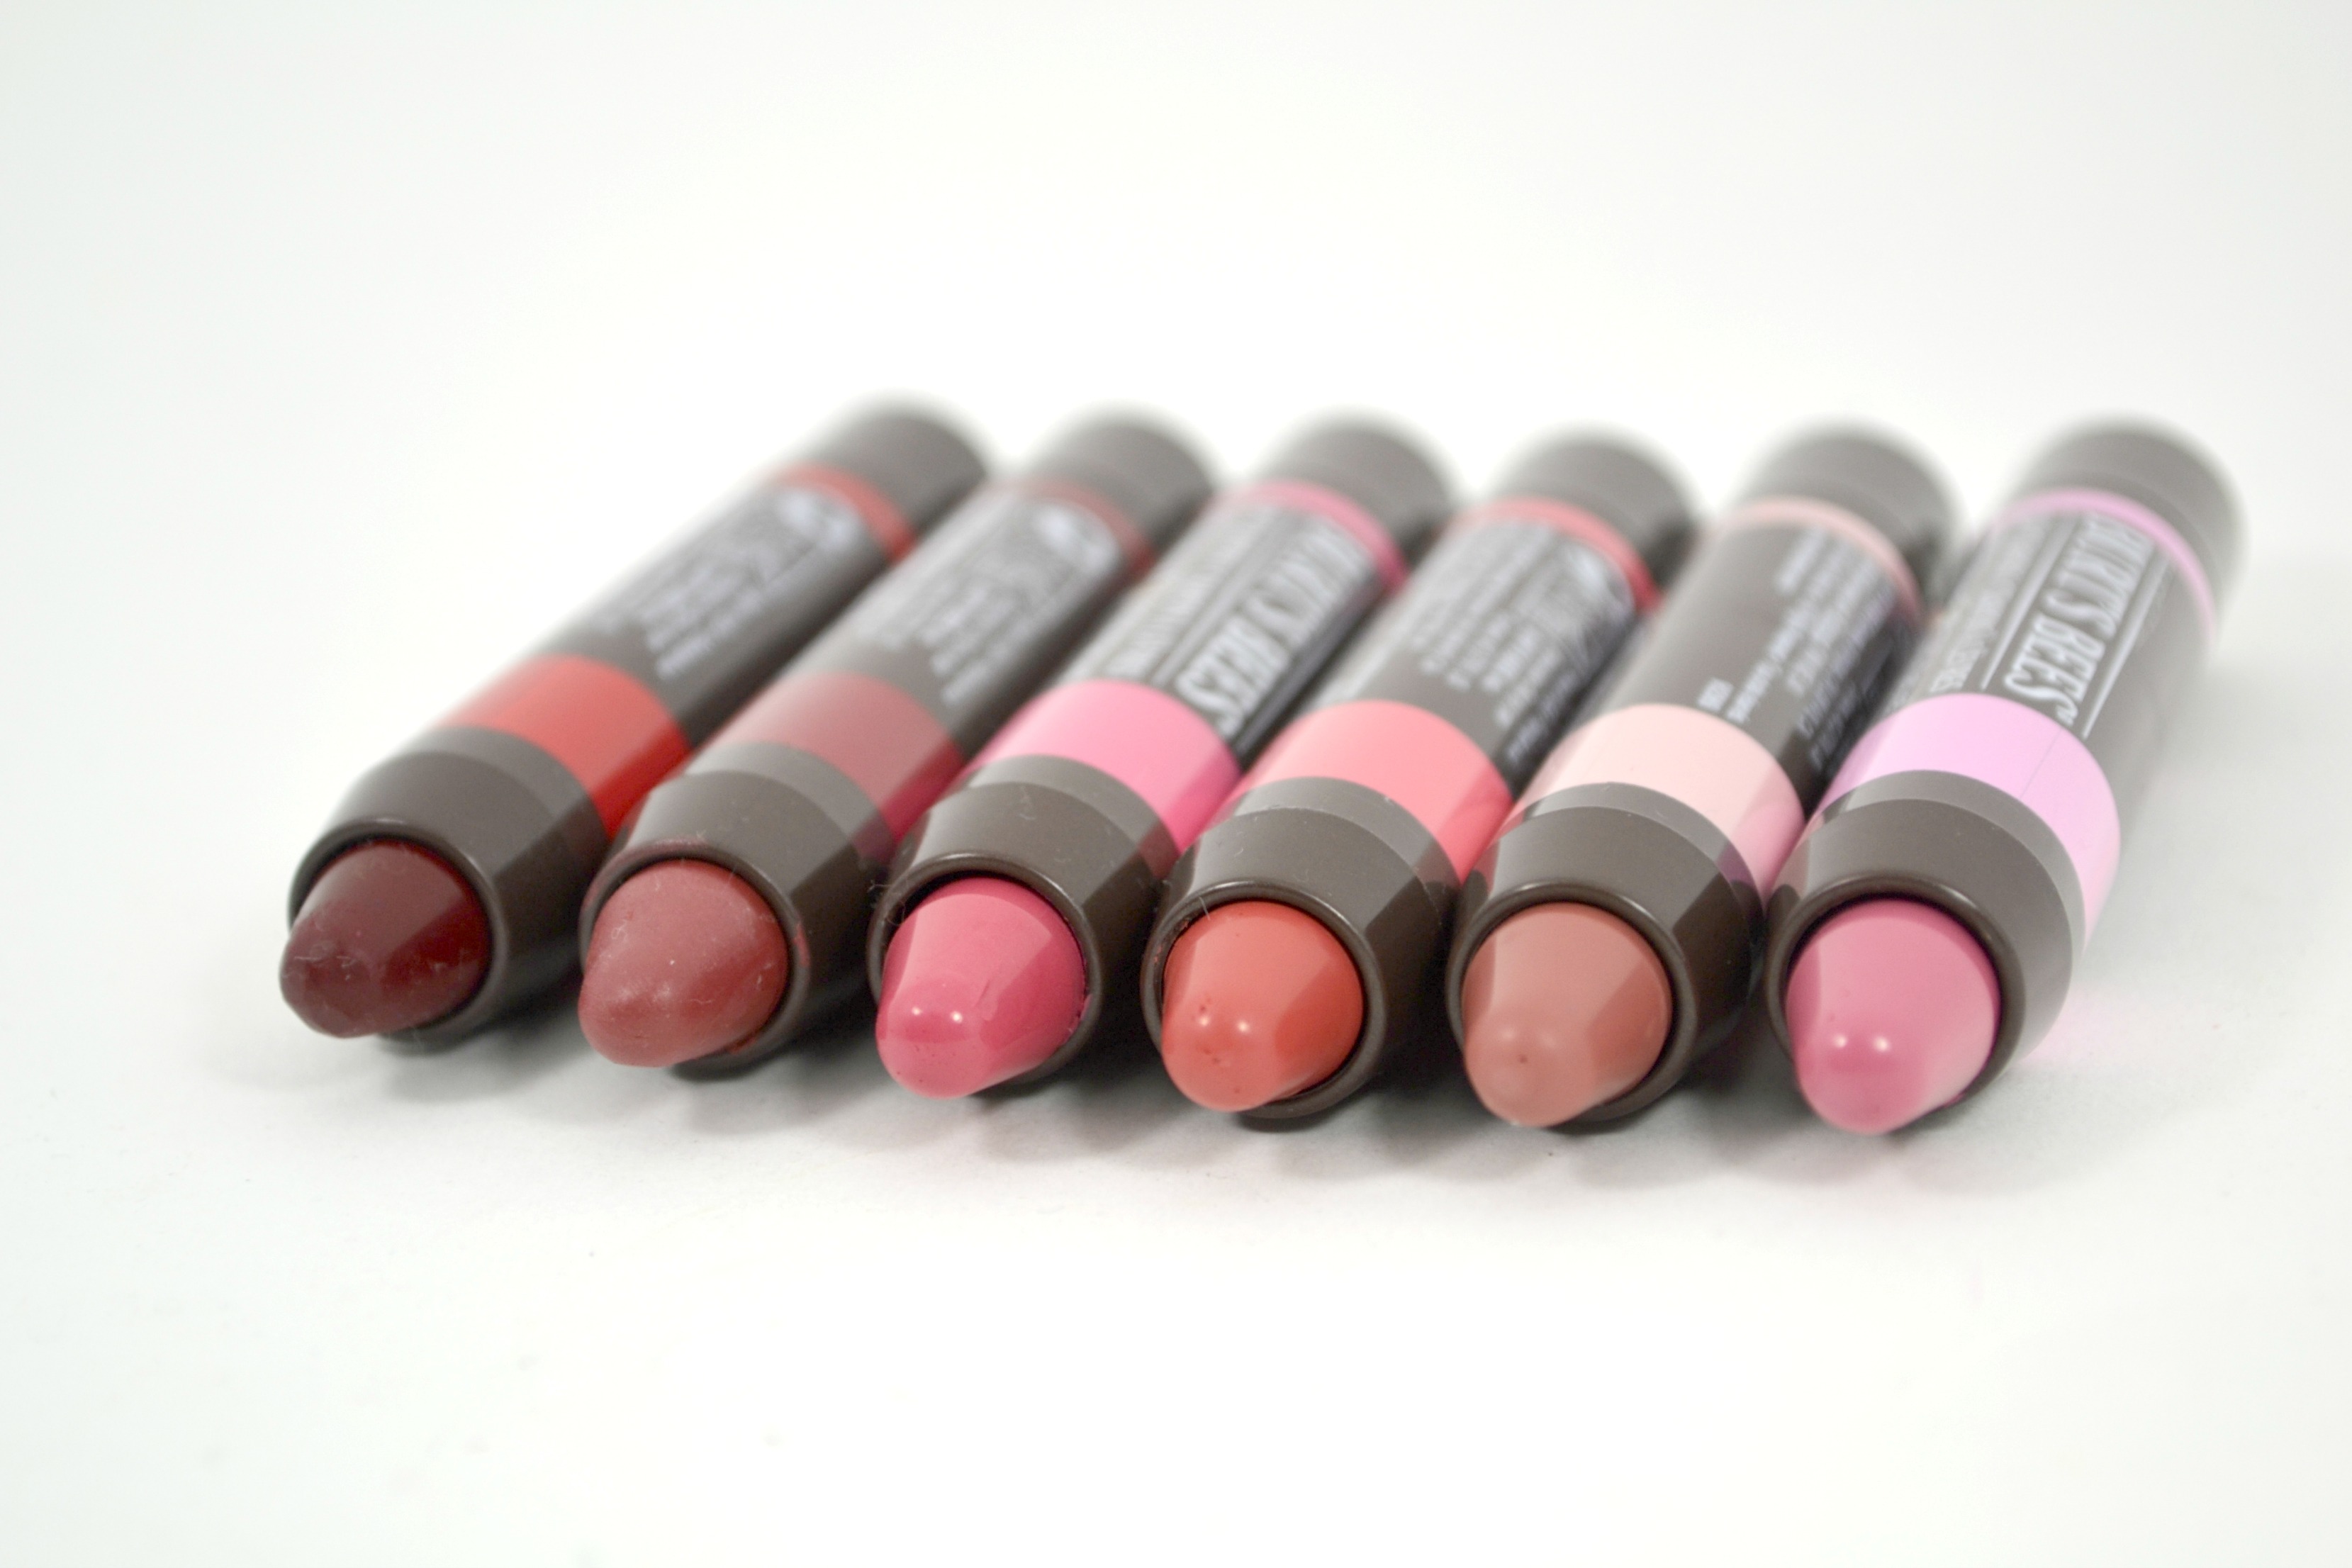 Burt's Bees Lip Crayons Review and Swatches